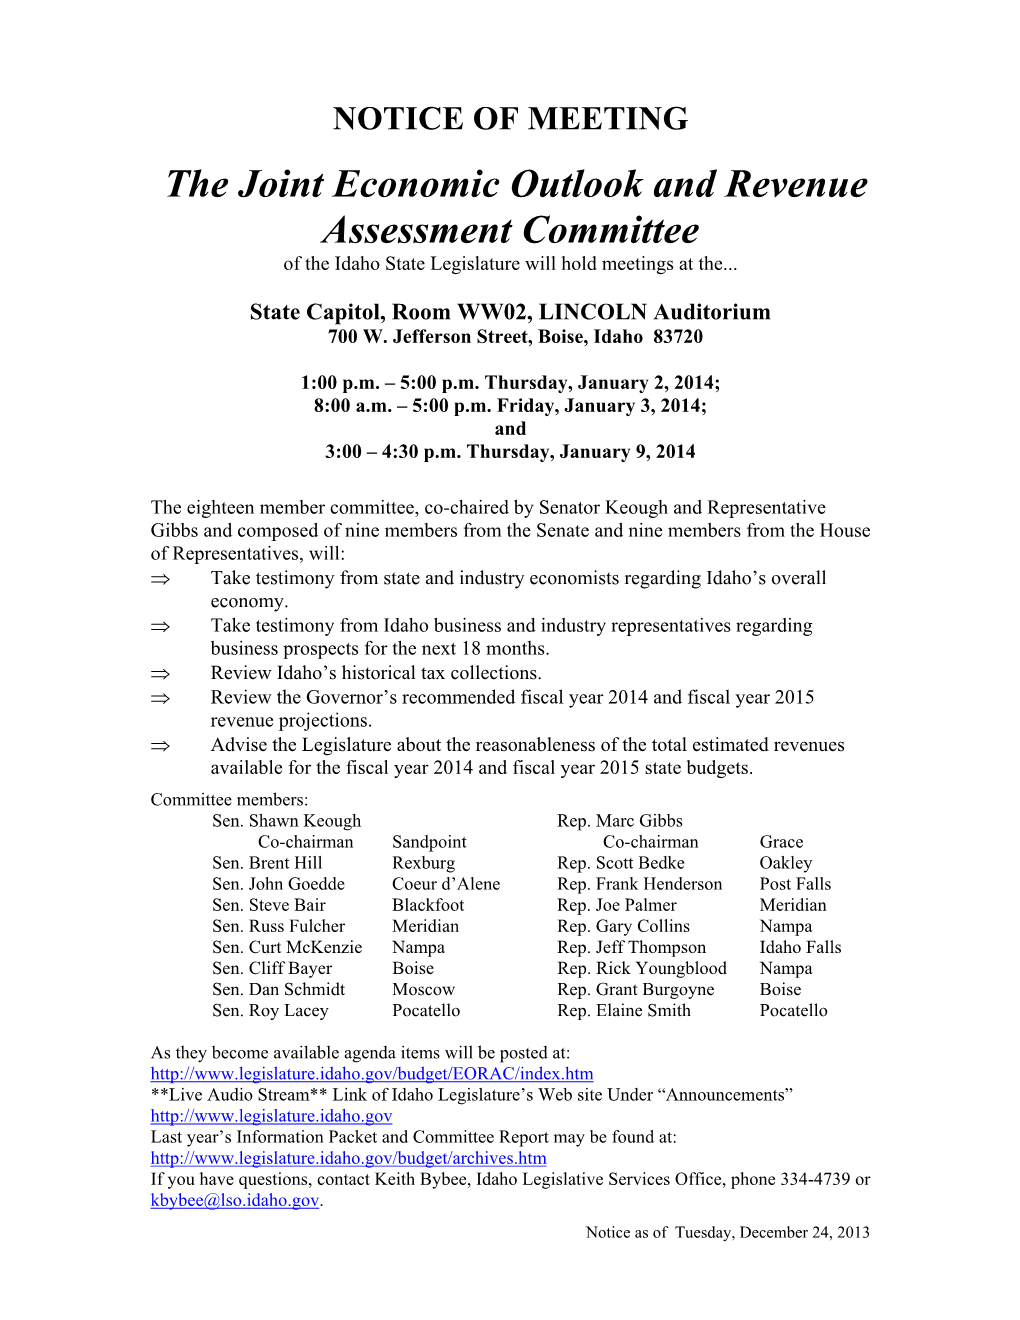 The Joint Economic Outlook and Revenue Assessment Committee of the Idaho State Legislature Will Hold Meetings at The